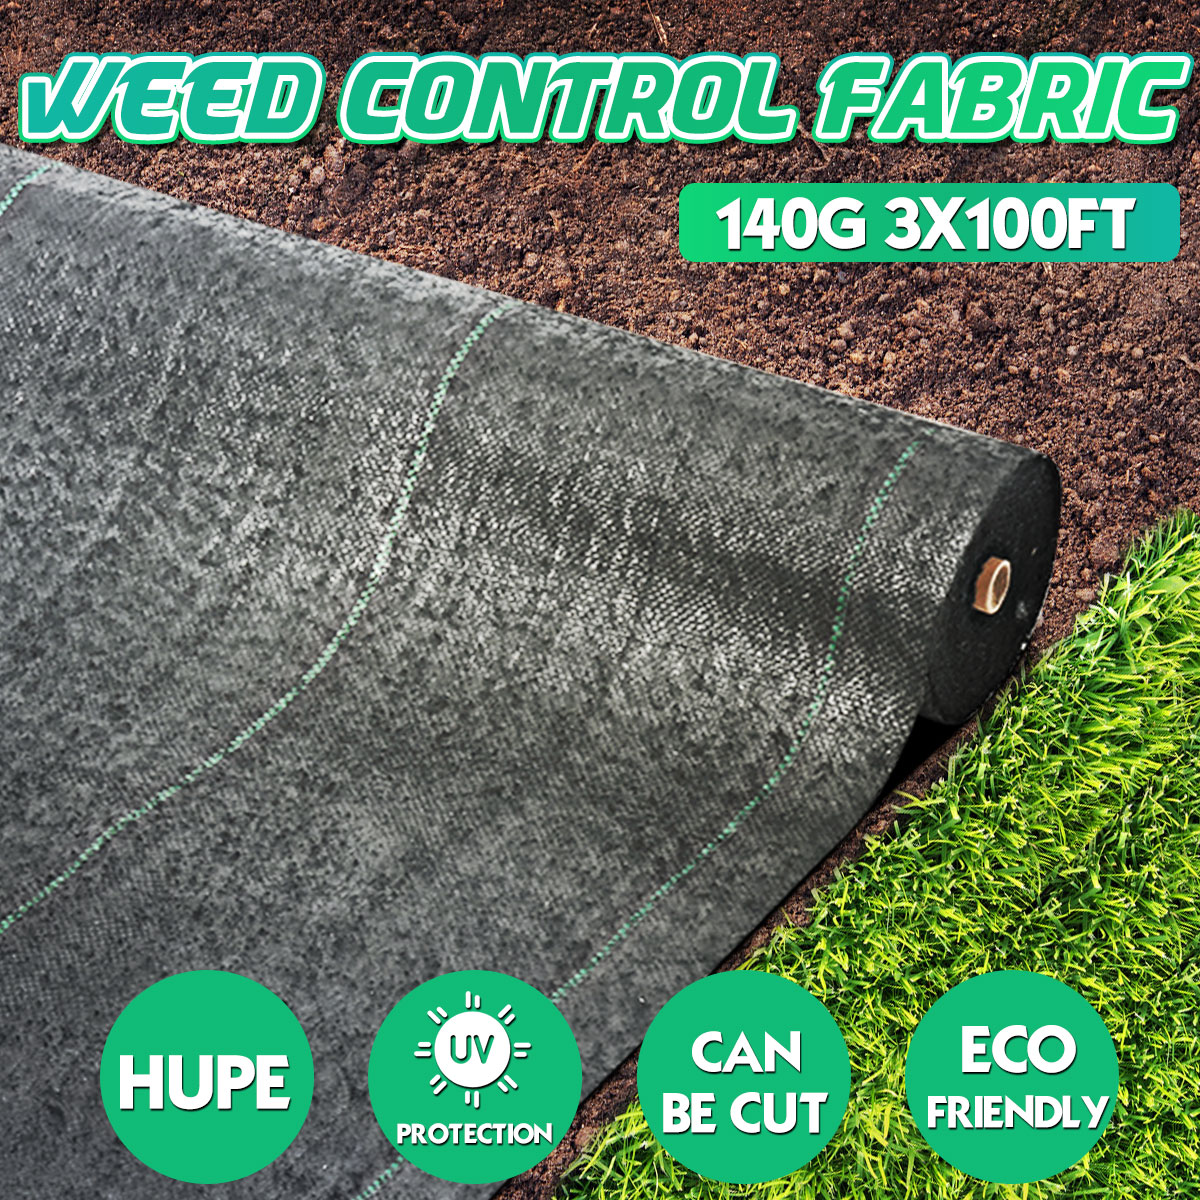 3-x-100ft-Breathable-Weed-Barrier-Landscape-Fabric-Garden-Greenhouse-Weed-Control-Anti-Pest-Ground-C-1742494-1